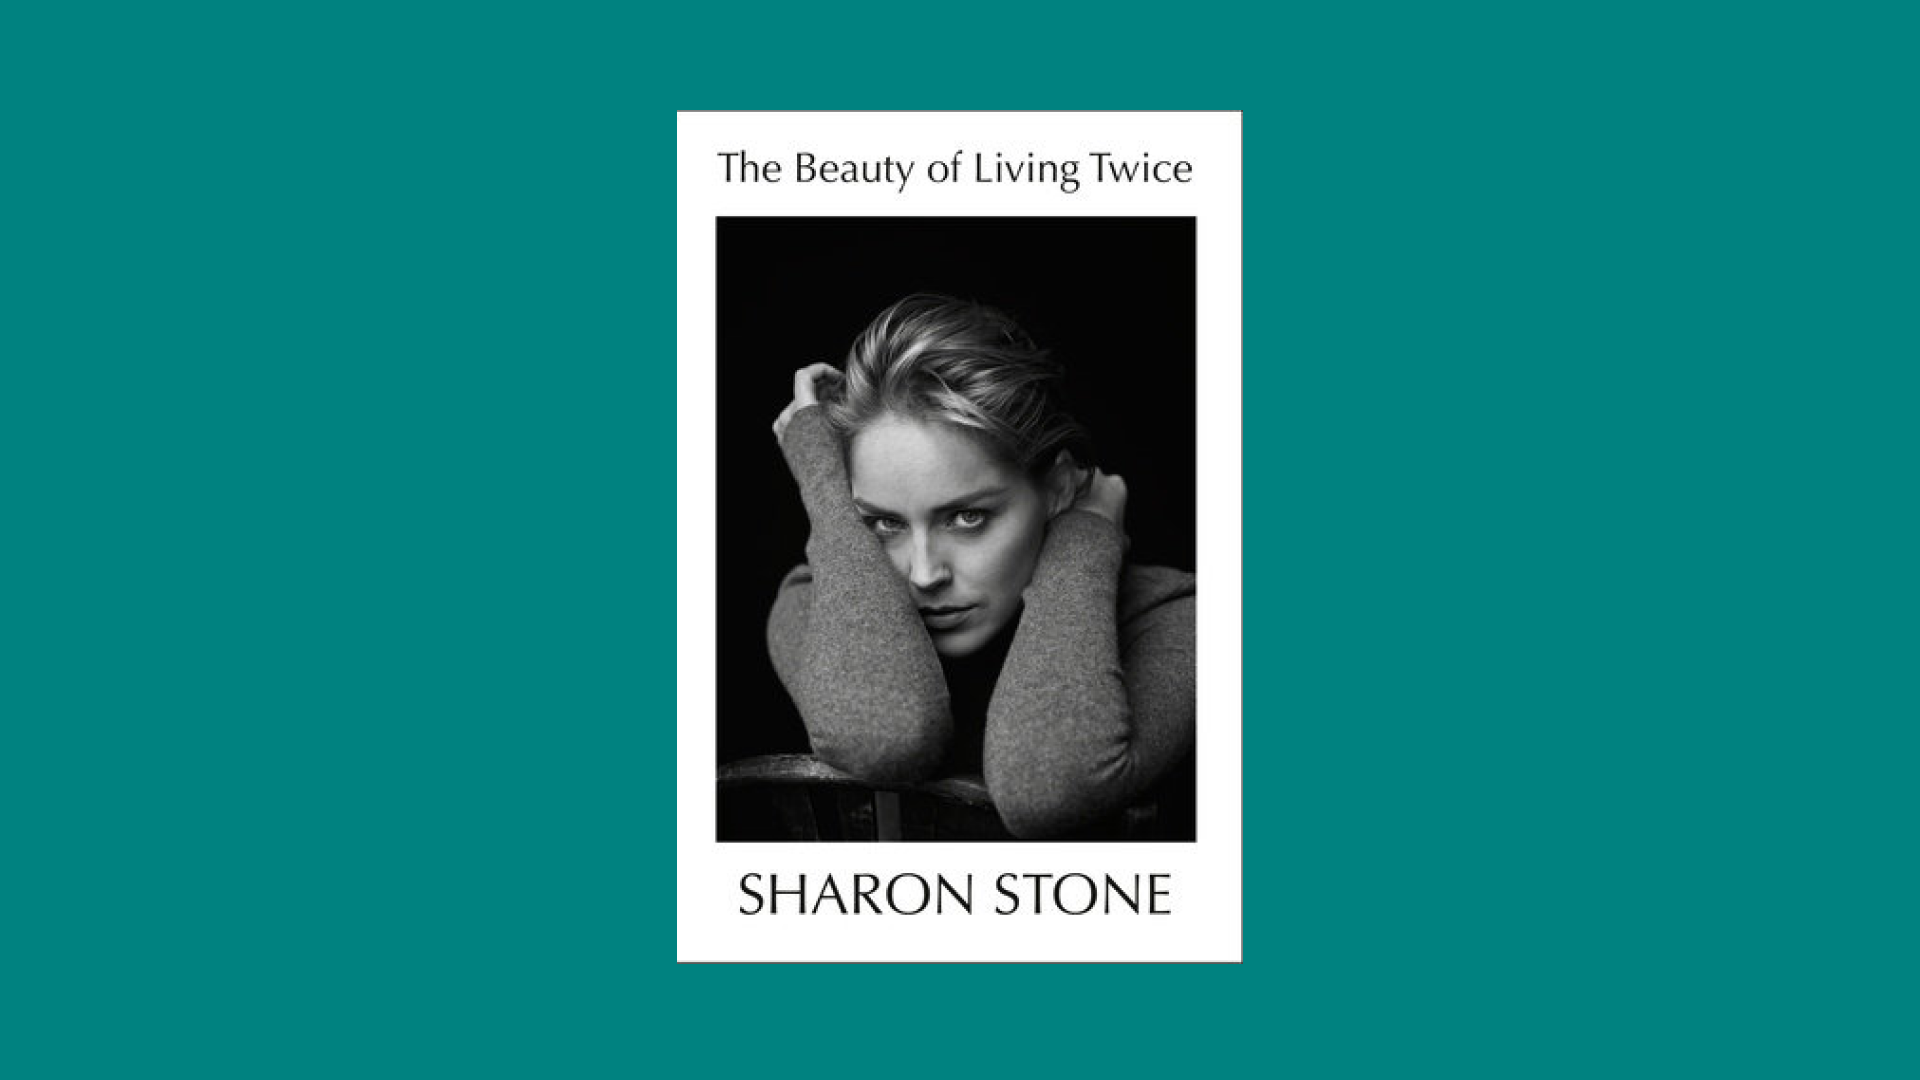 “The Beauty of Living Twice” by Sharon Stone